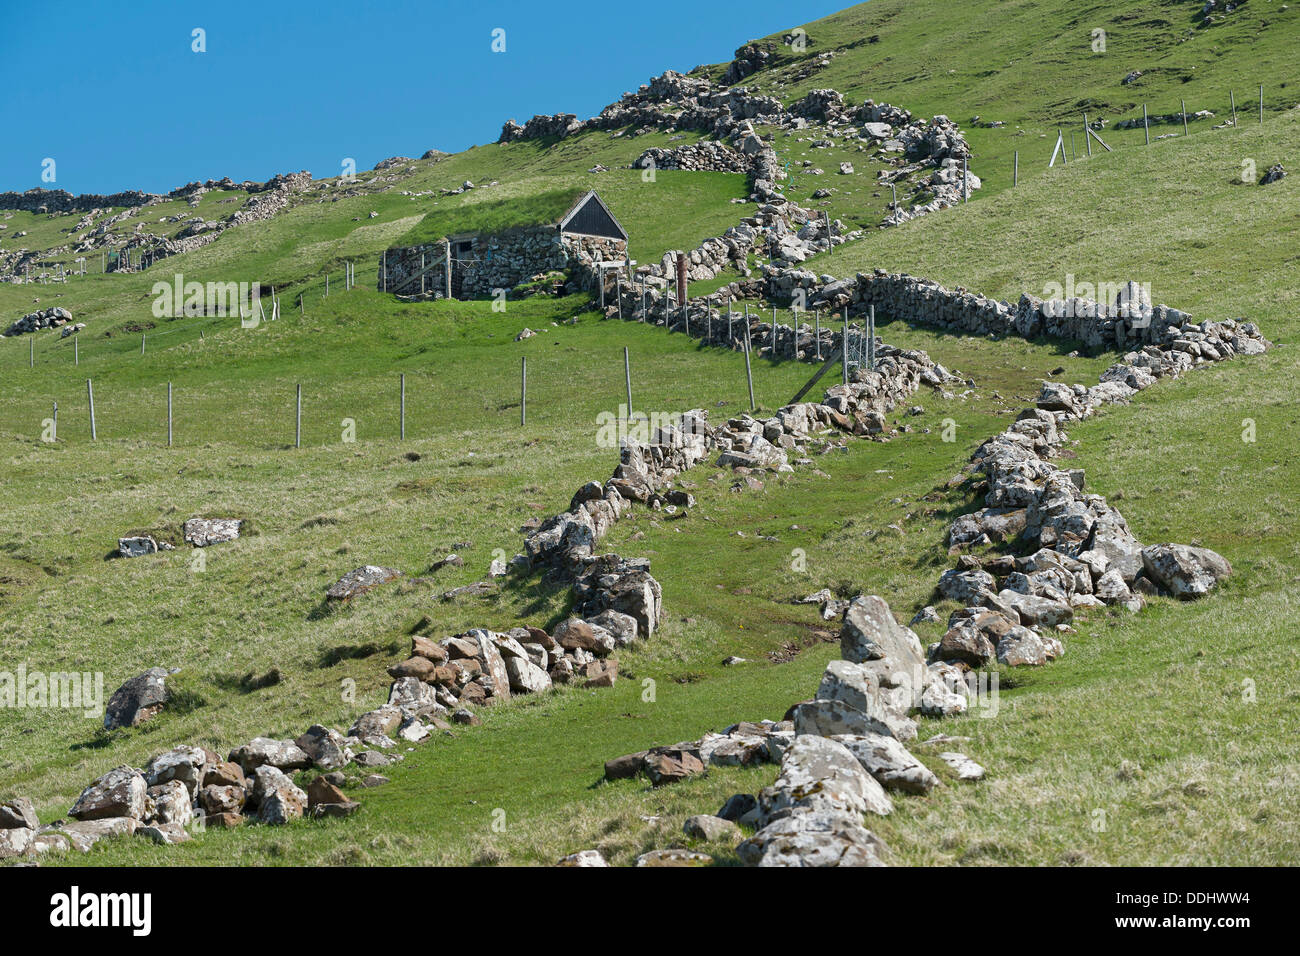 Ancient walls that limit the sheep's way during a sheep drive Stock Photo